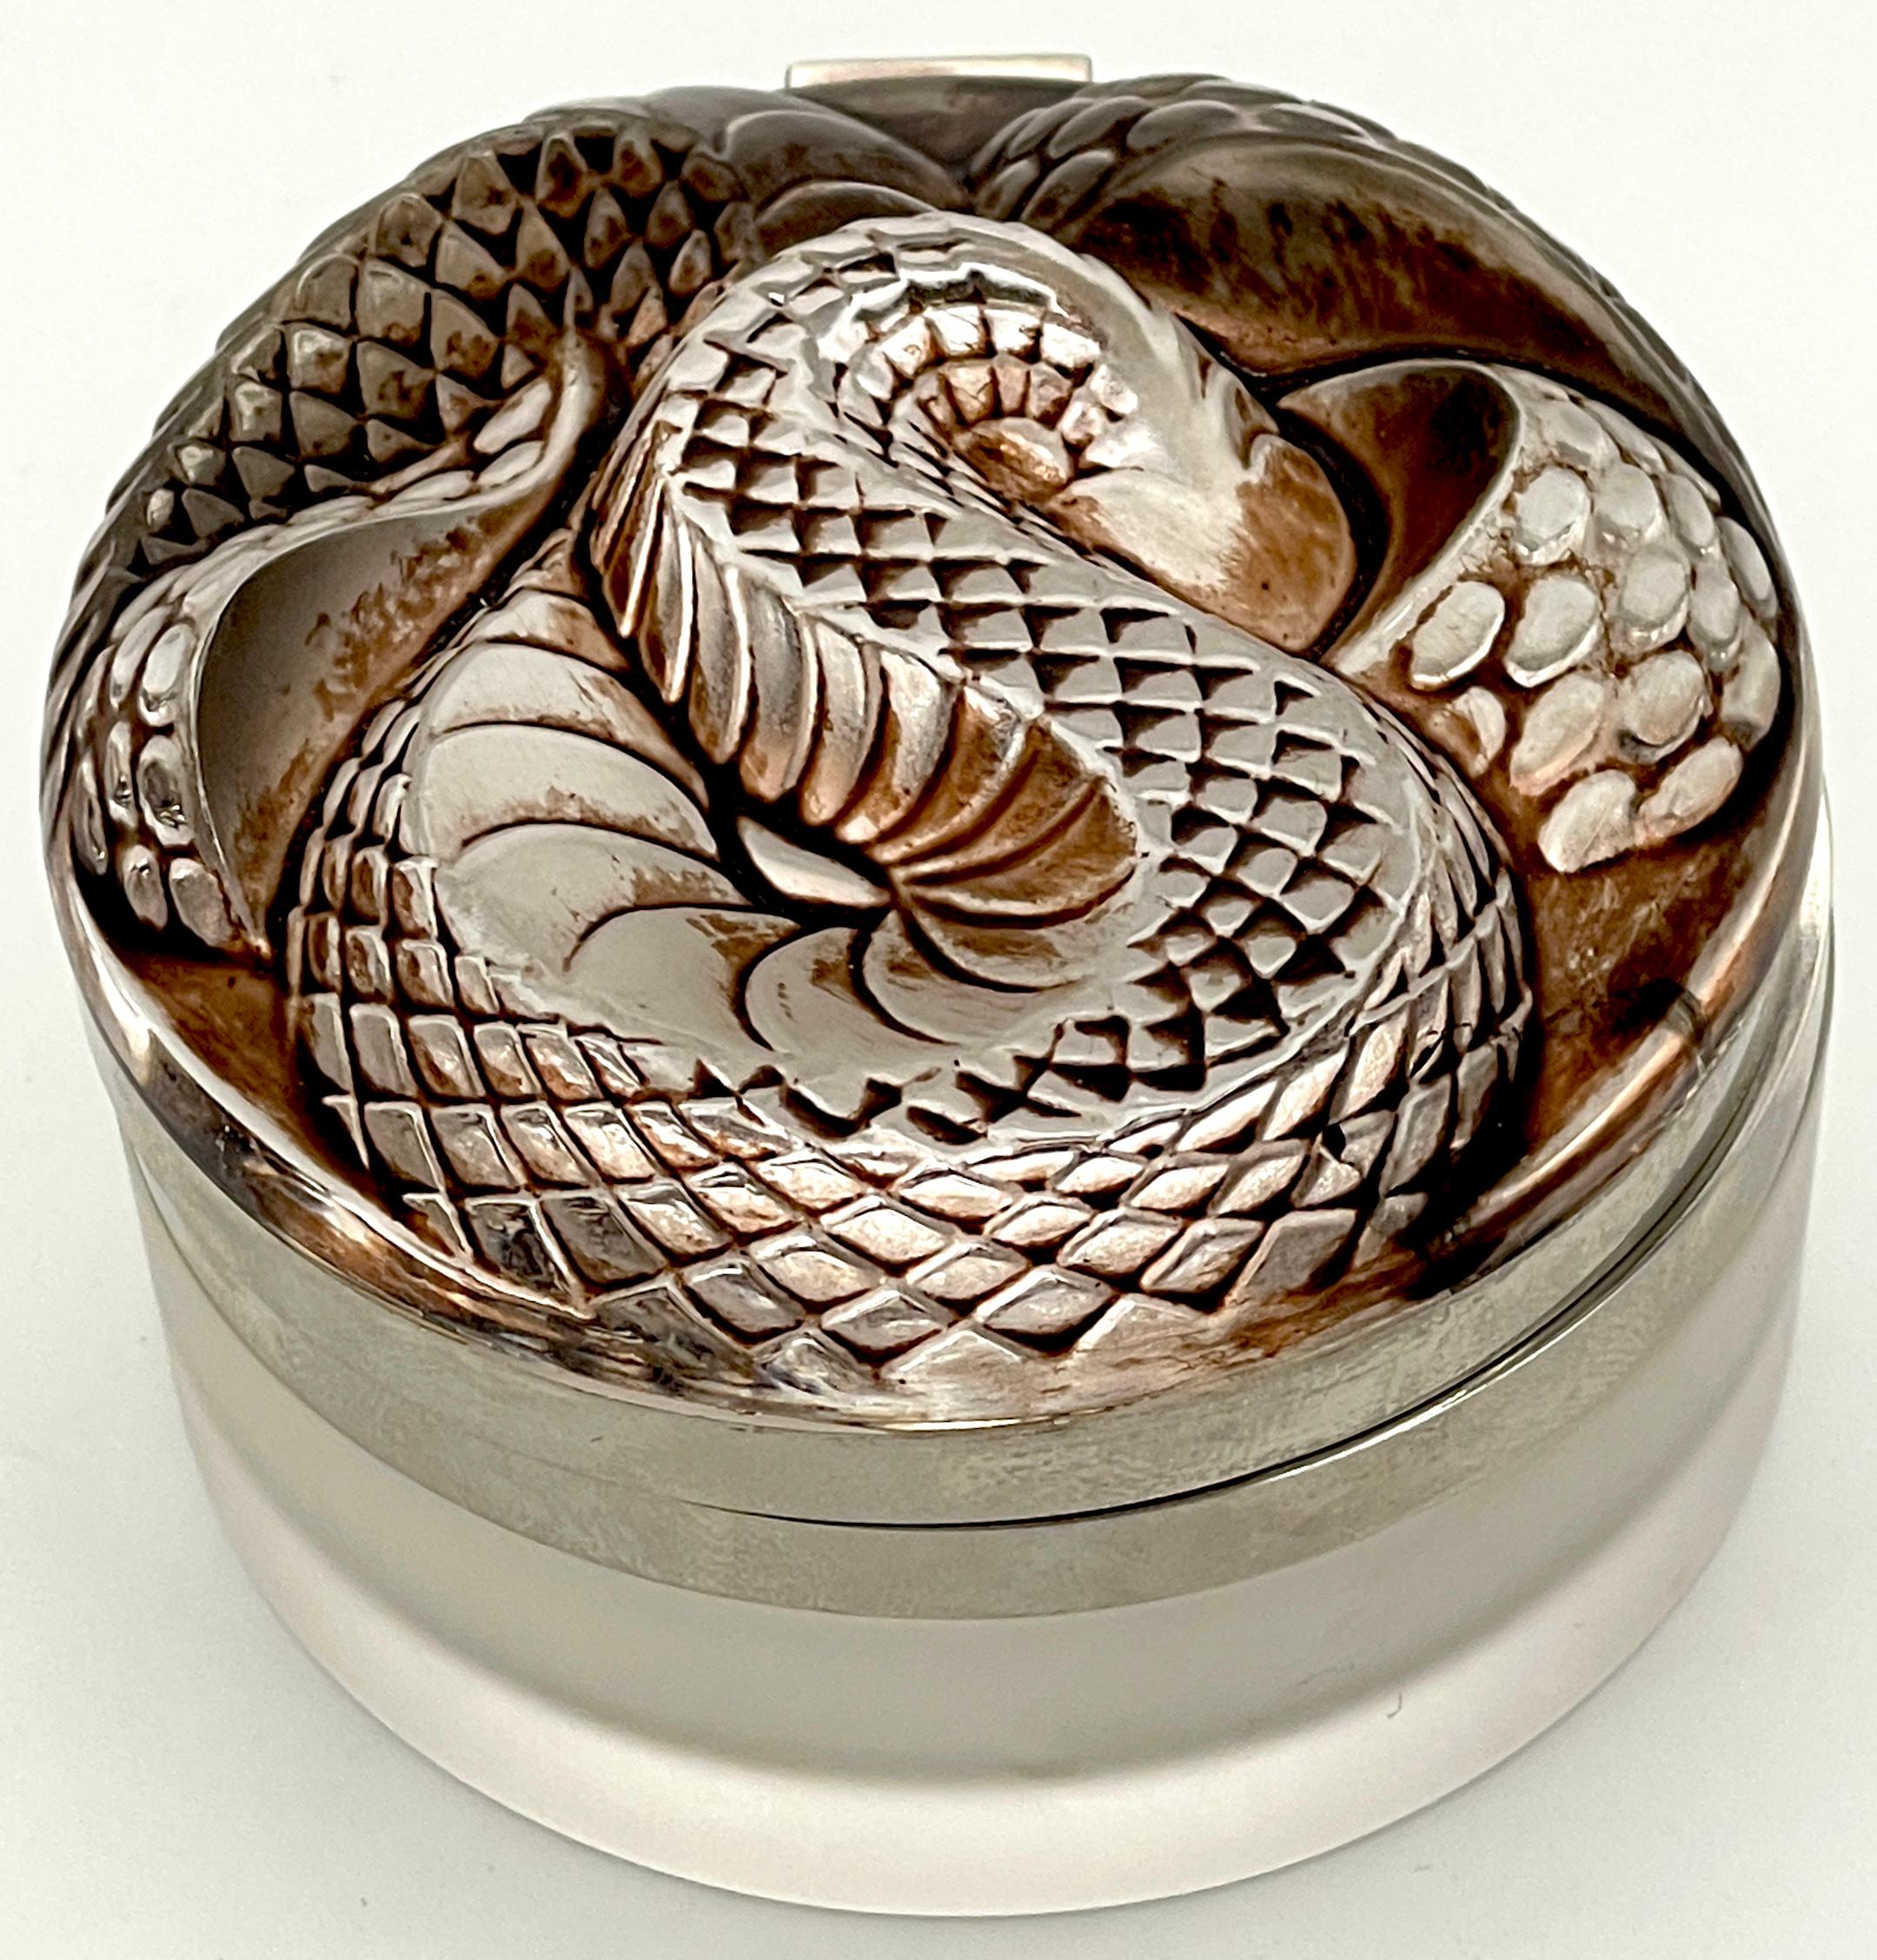 Lalique Gray/Black Serpent Box, 1970s 
France, 20th Century 

A  rare and exquisite Lalique Gray/Black Serpent Box, made in France during the 1970s. Also known as the 'Snake' pattern, this three-dimensional lid features intricately intertwined